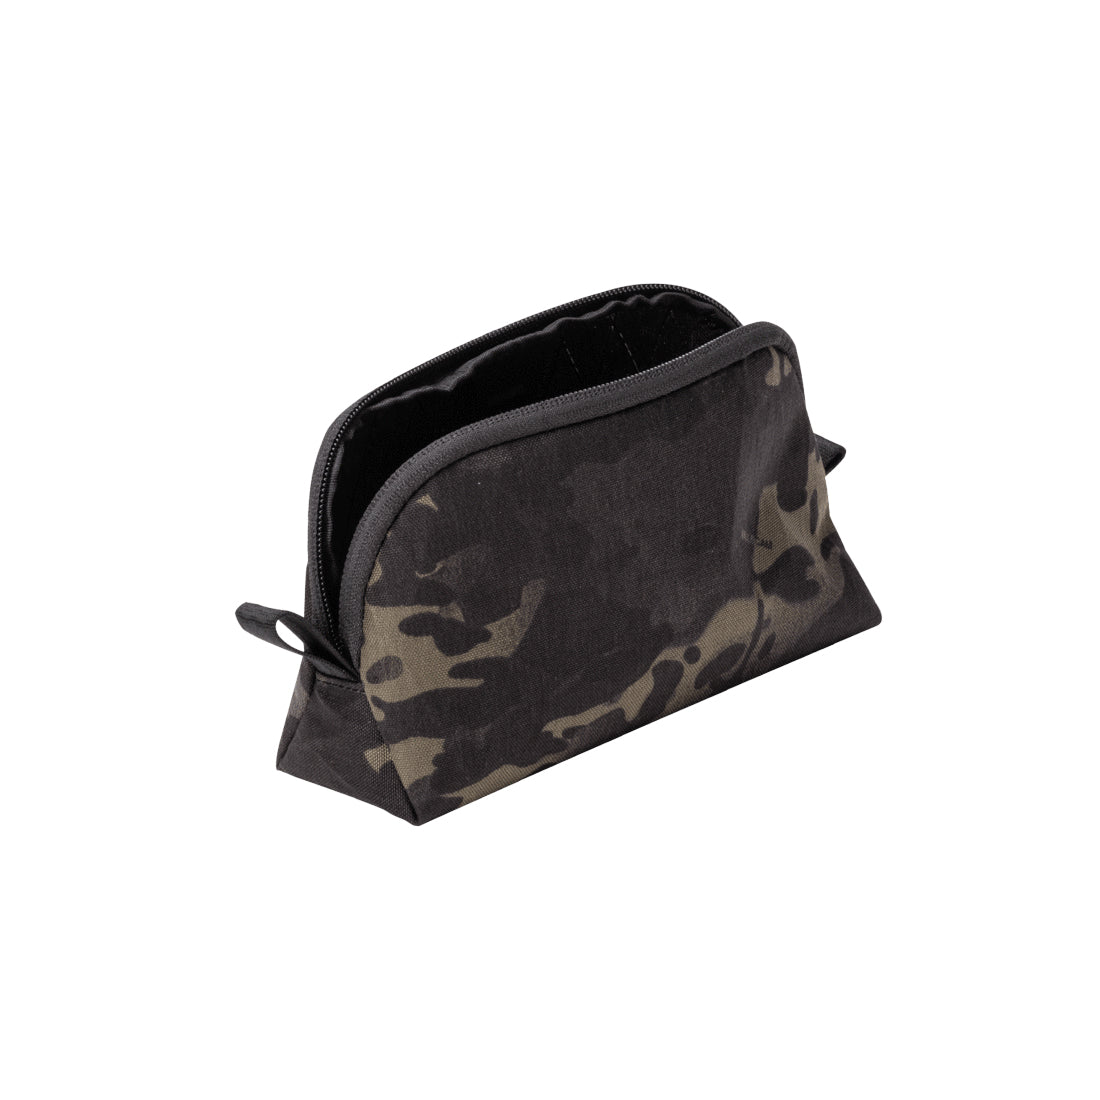 Able Carry : The Daily Stash Pouch : Dark Forest